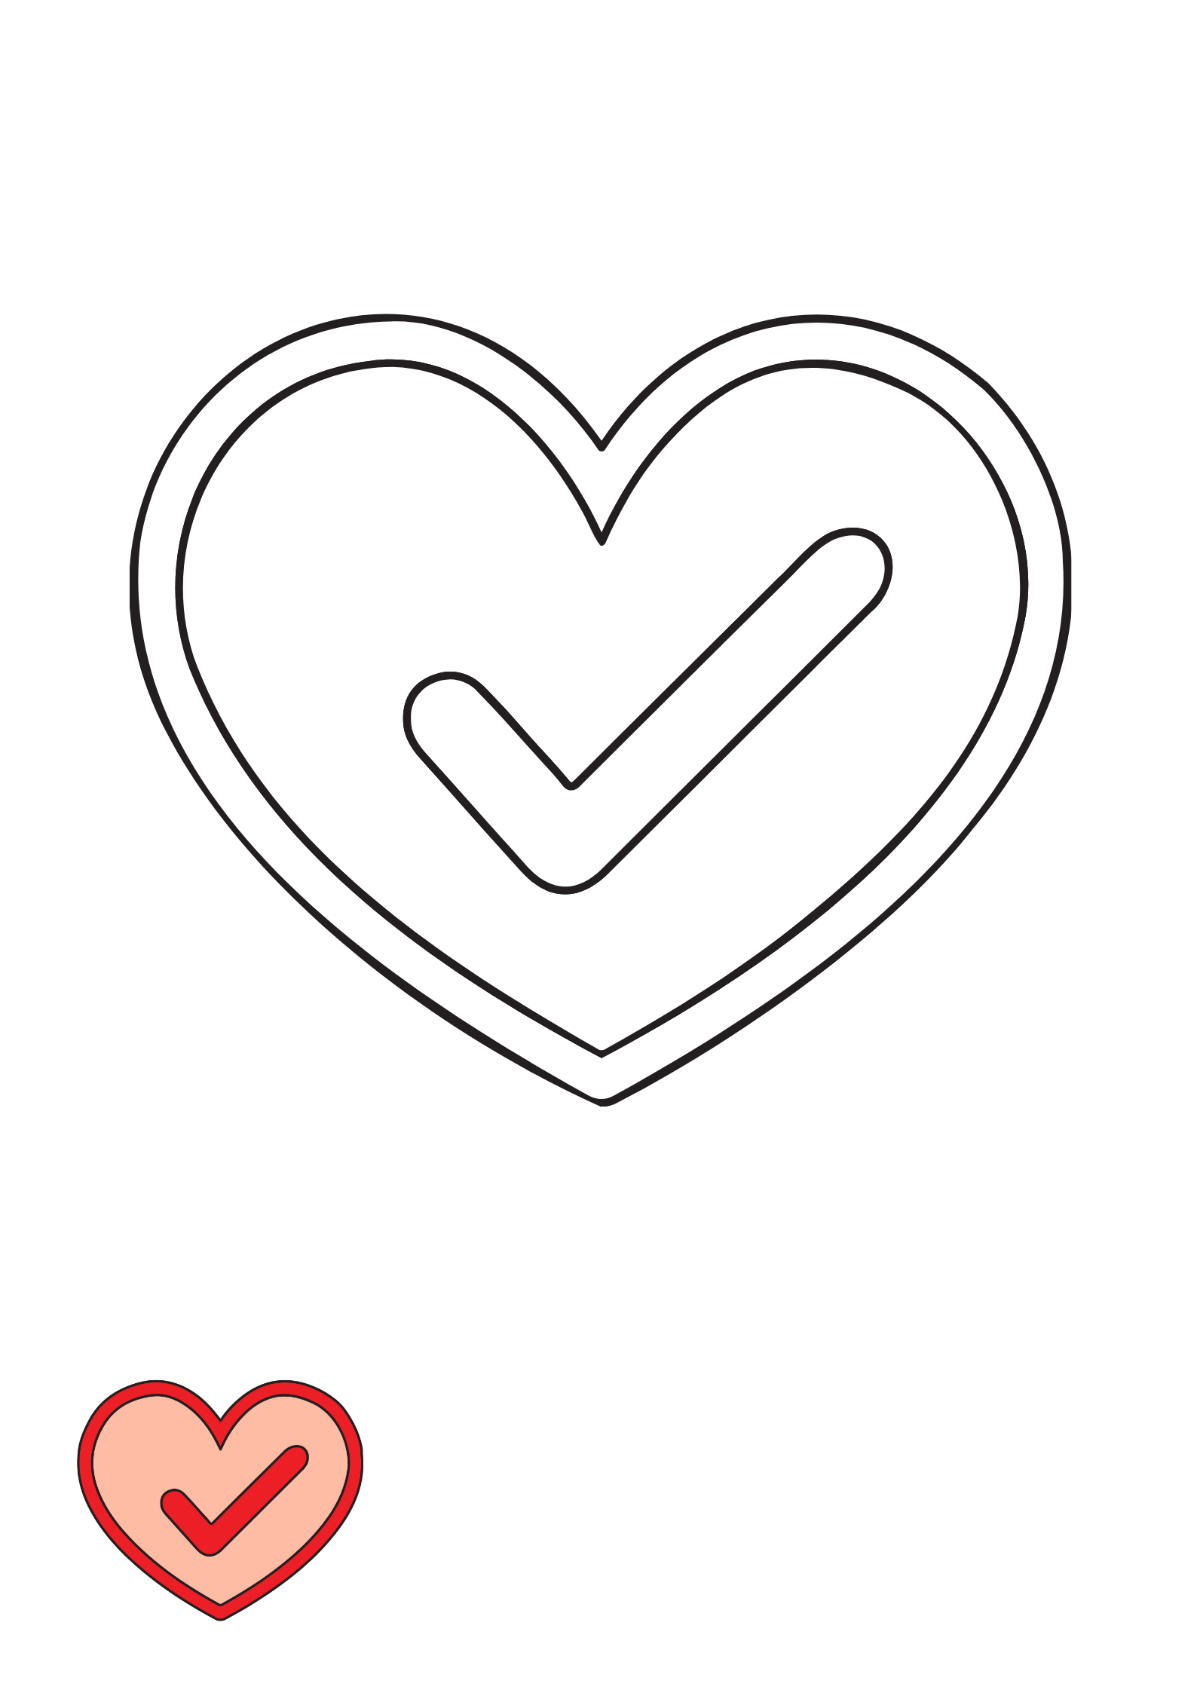 Heart Check Mark coloring page